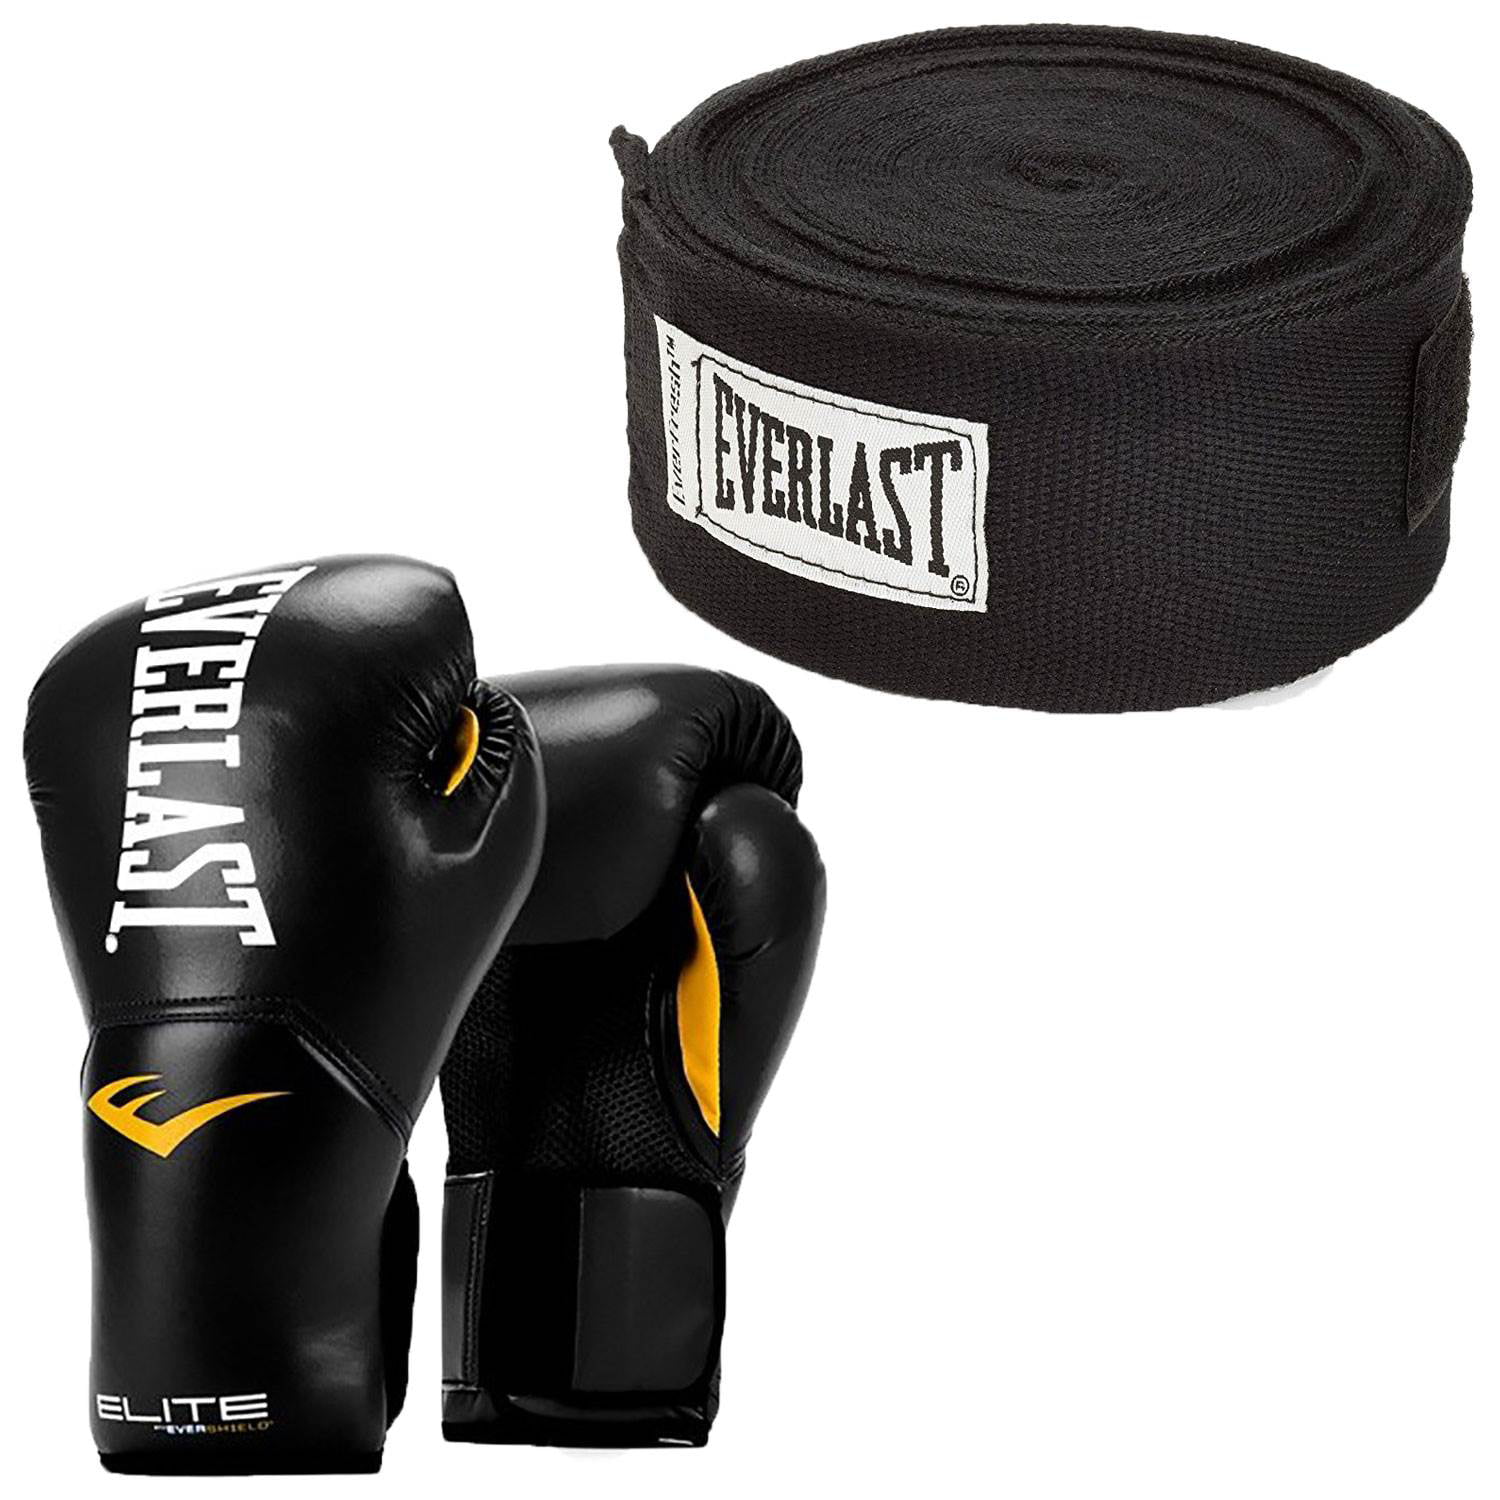 Everlast 120 Inch Polyester Cotton Boxing Sparring Training Hand Wraps Black 